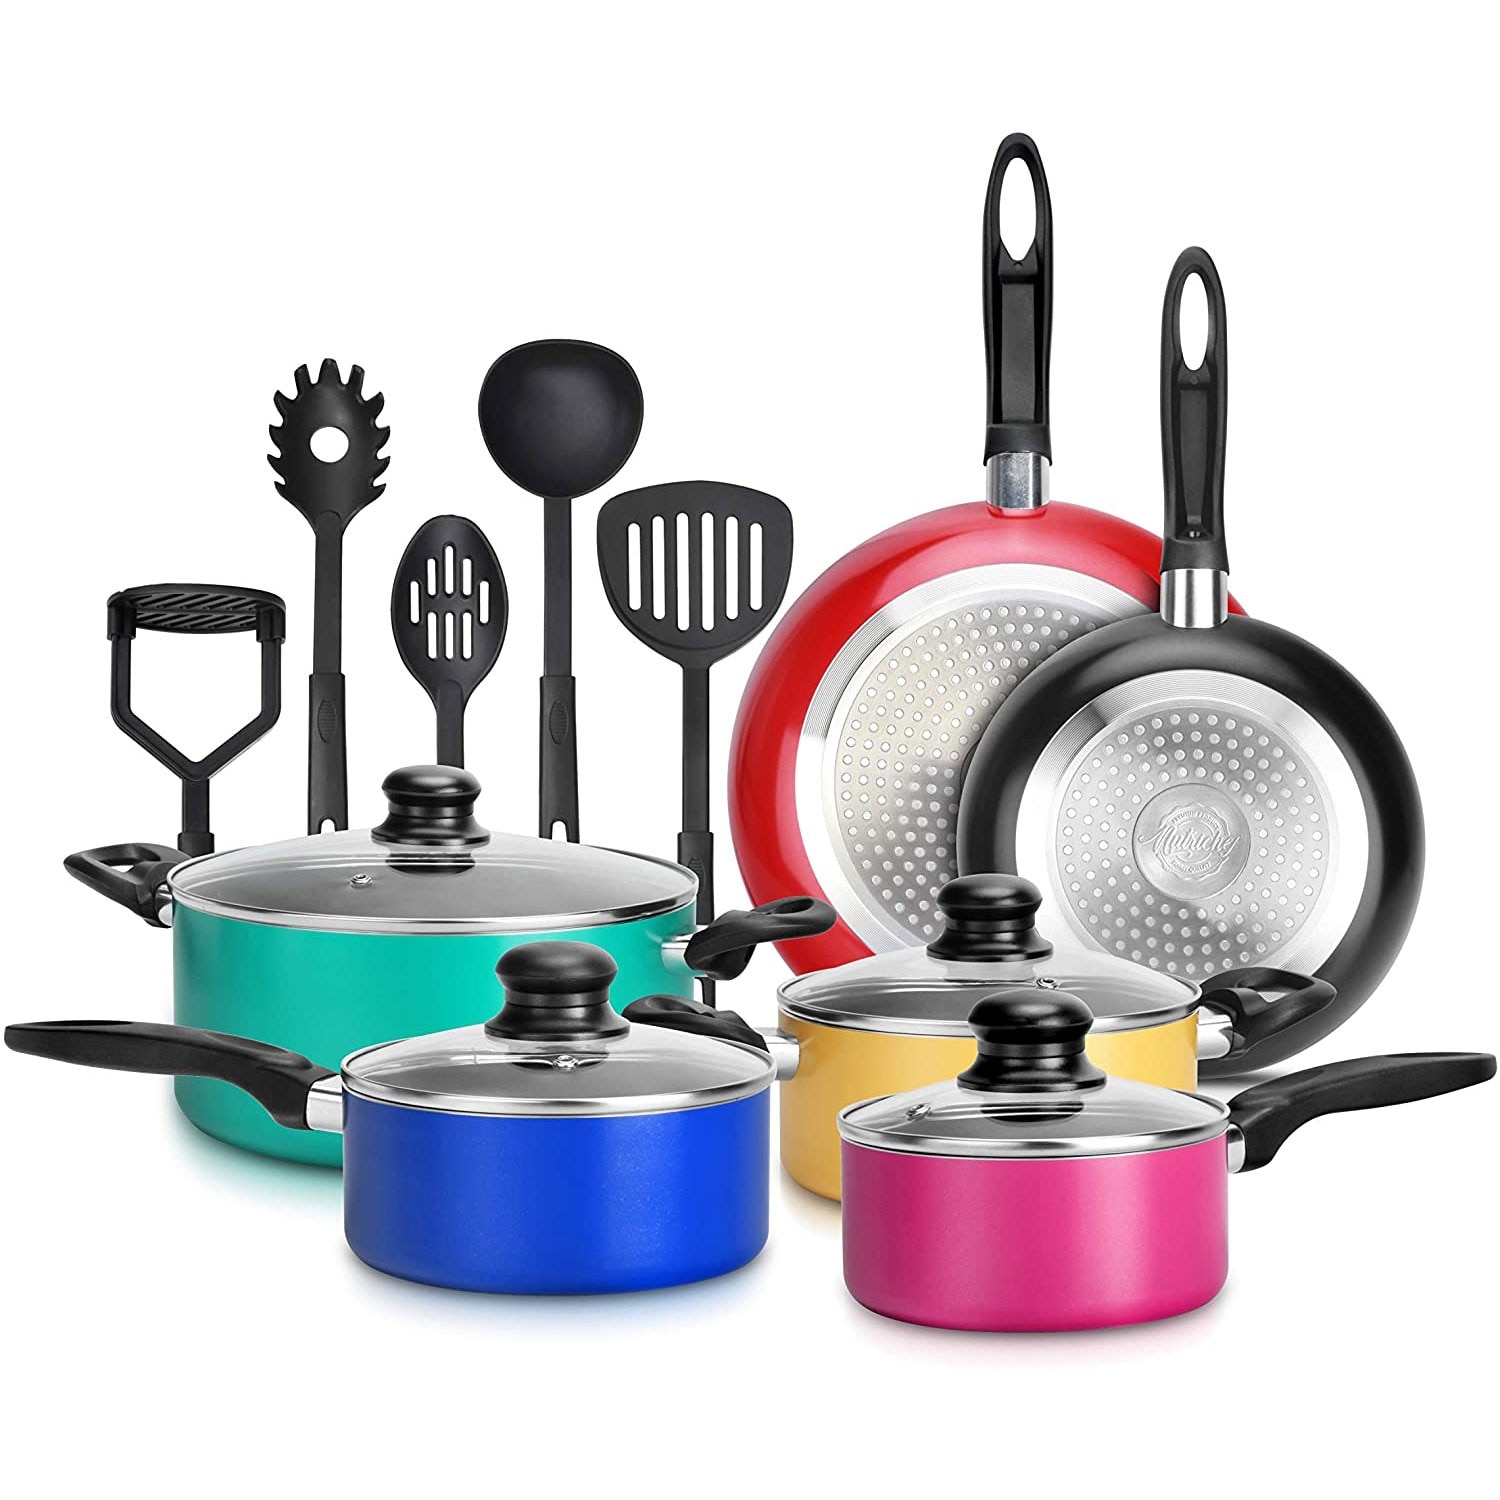 SereneLife 15 Piece Pots and Pans Home Non Stick Chef Kitchenware